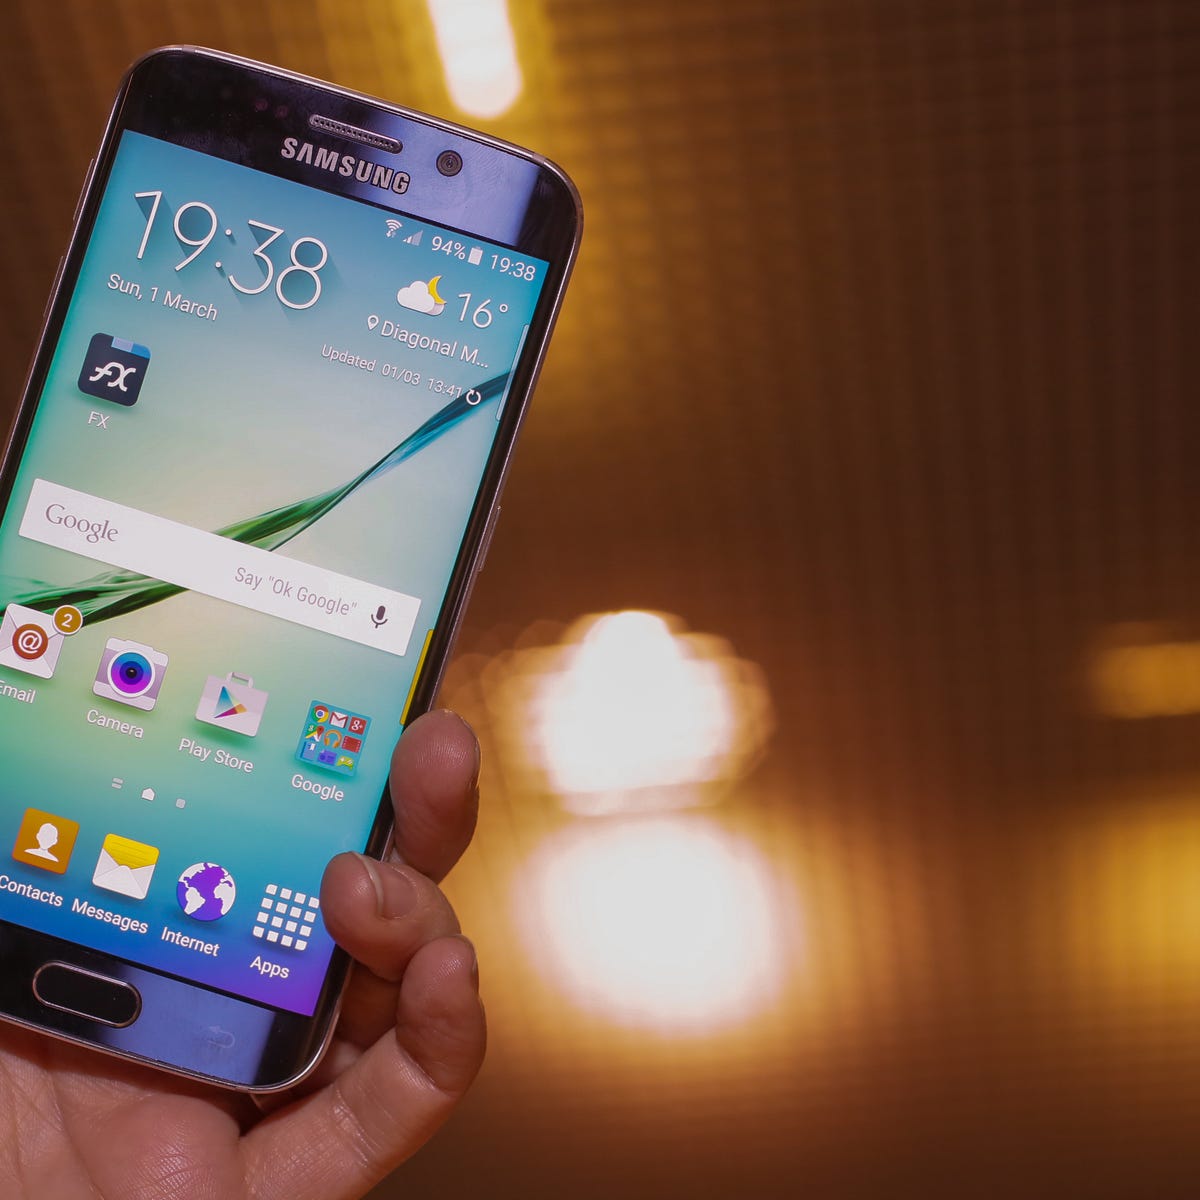 Samsung S6 Edge review: Striking curved makes this S6 to crave - CNET